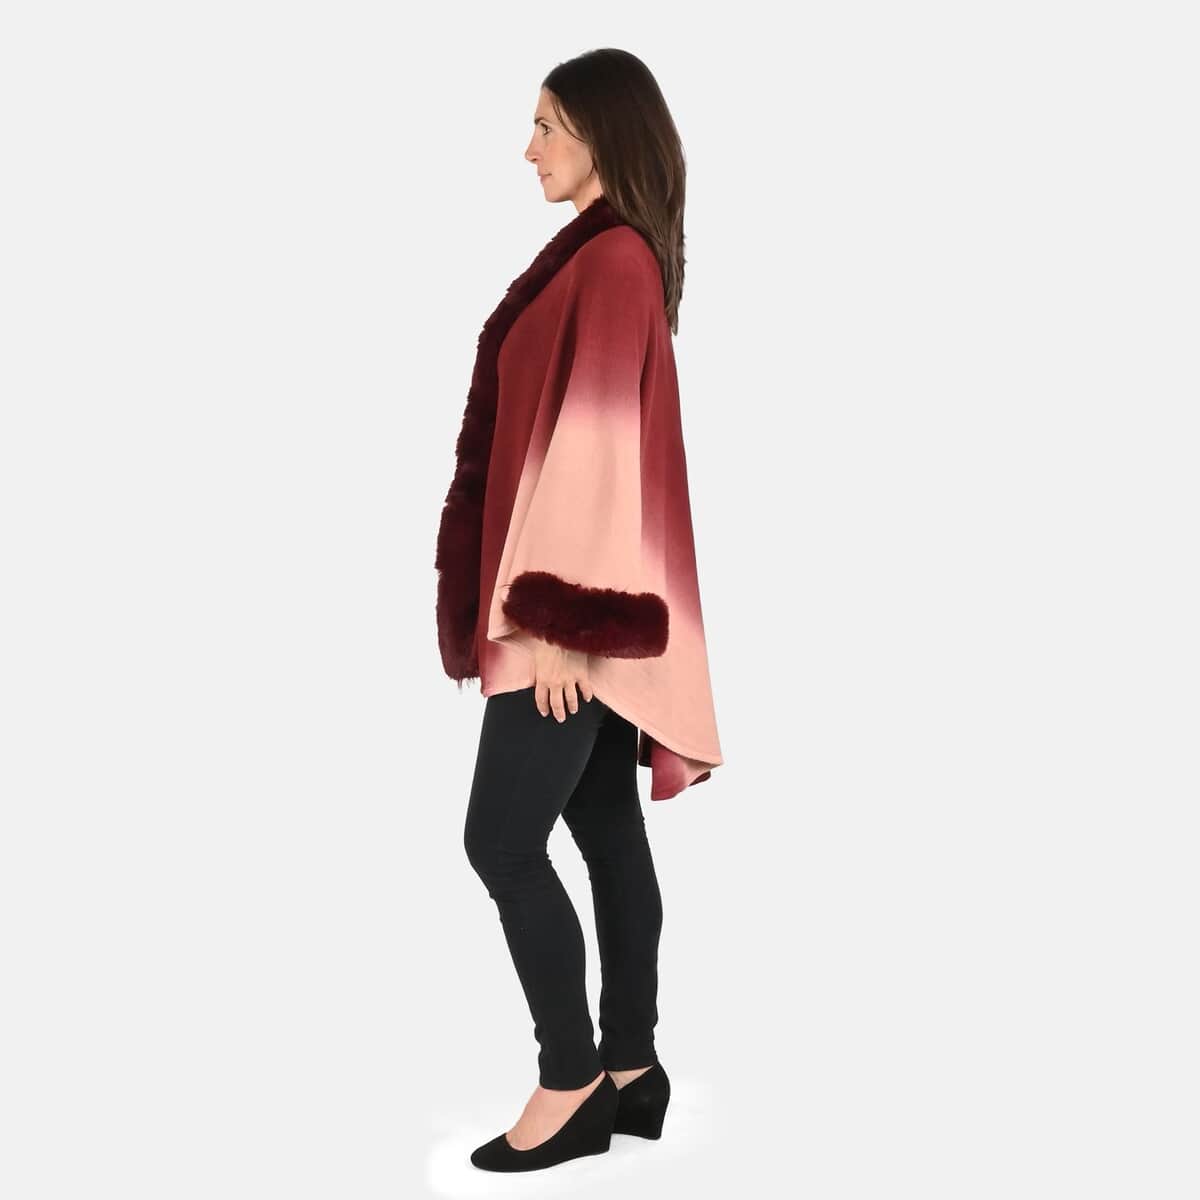 Tamsy Burgundy Ombre Cape with Faux Fur Trim - One Size Fits Most image number 2